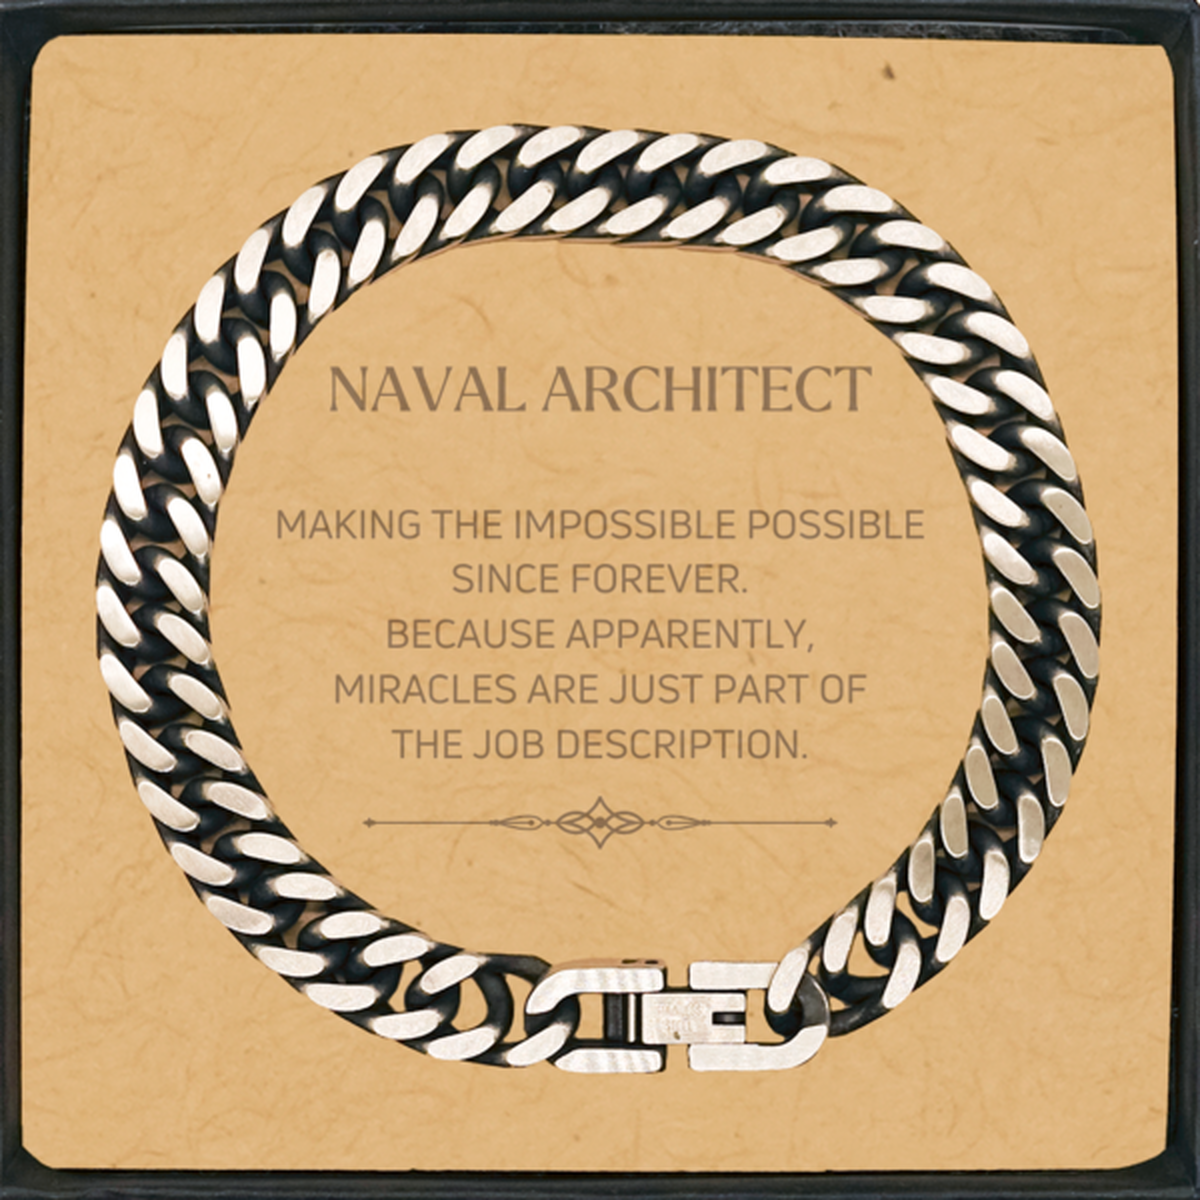 Funny Naval Architect Gifts, Miracles are just part of the job description, Inspirational Birthday Cuban Link Chain Bracelet For Naval Architect, Men, Women, Coworkers, Friends, Boss